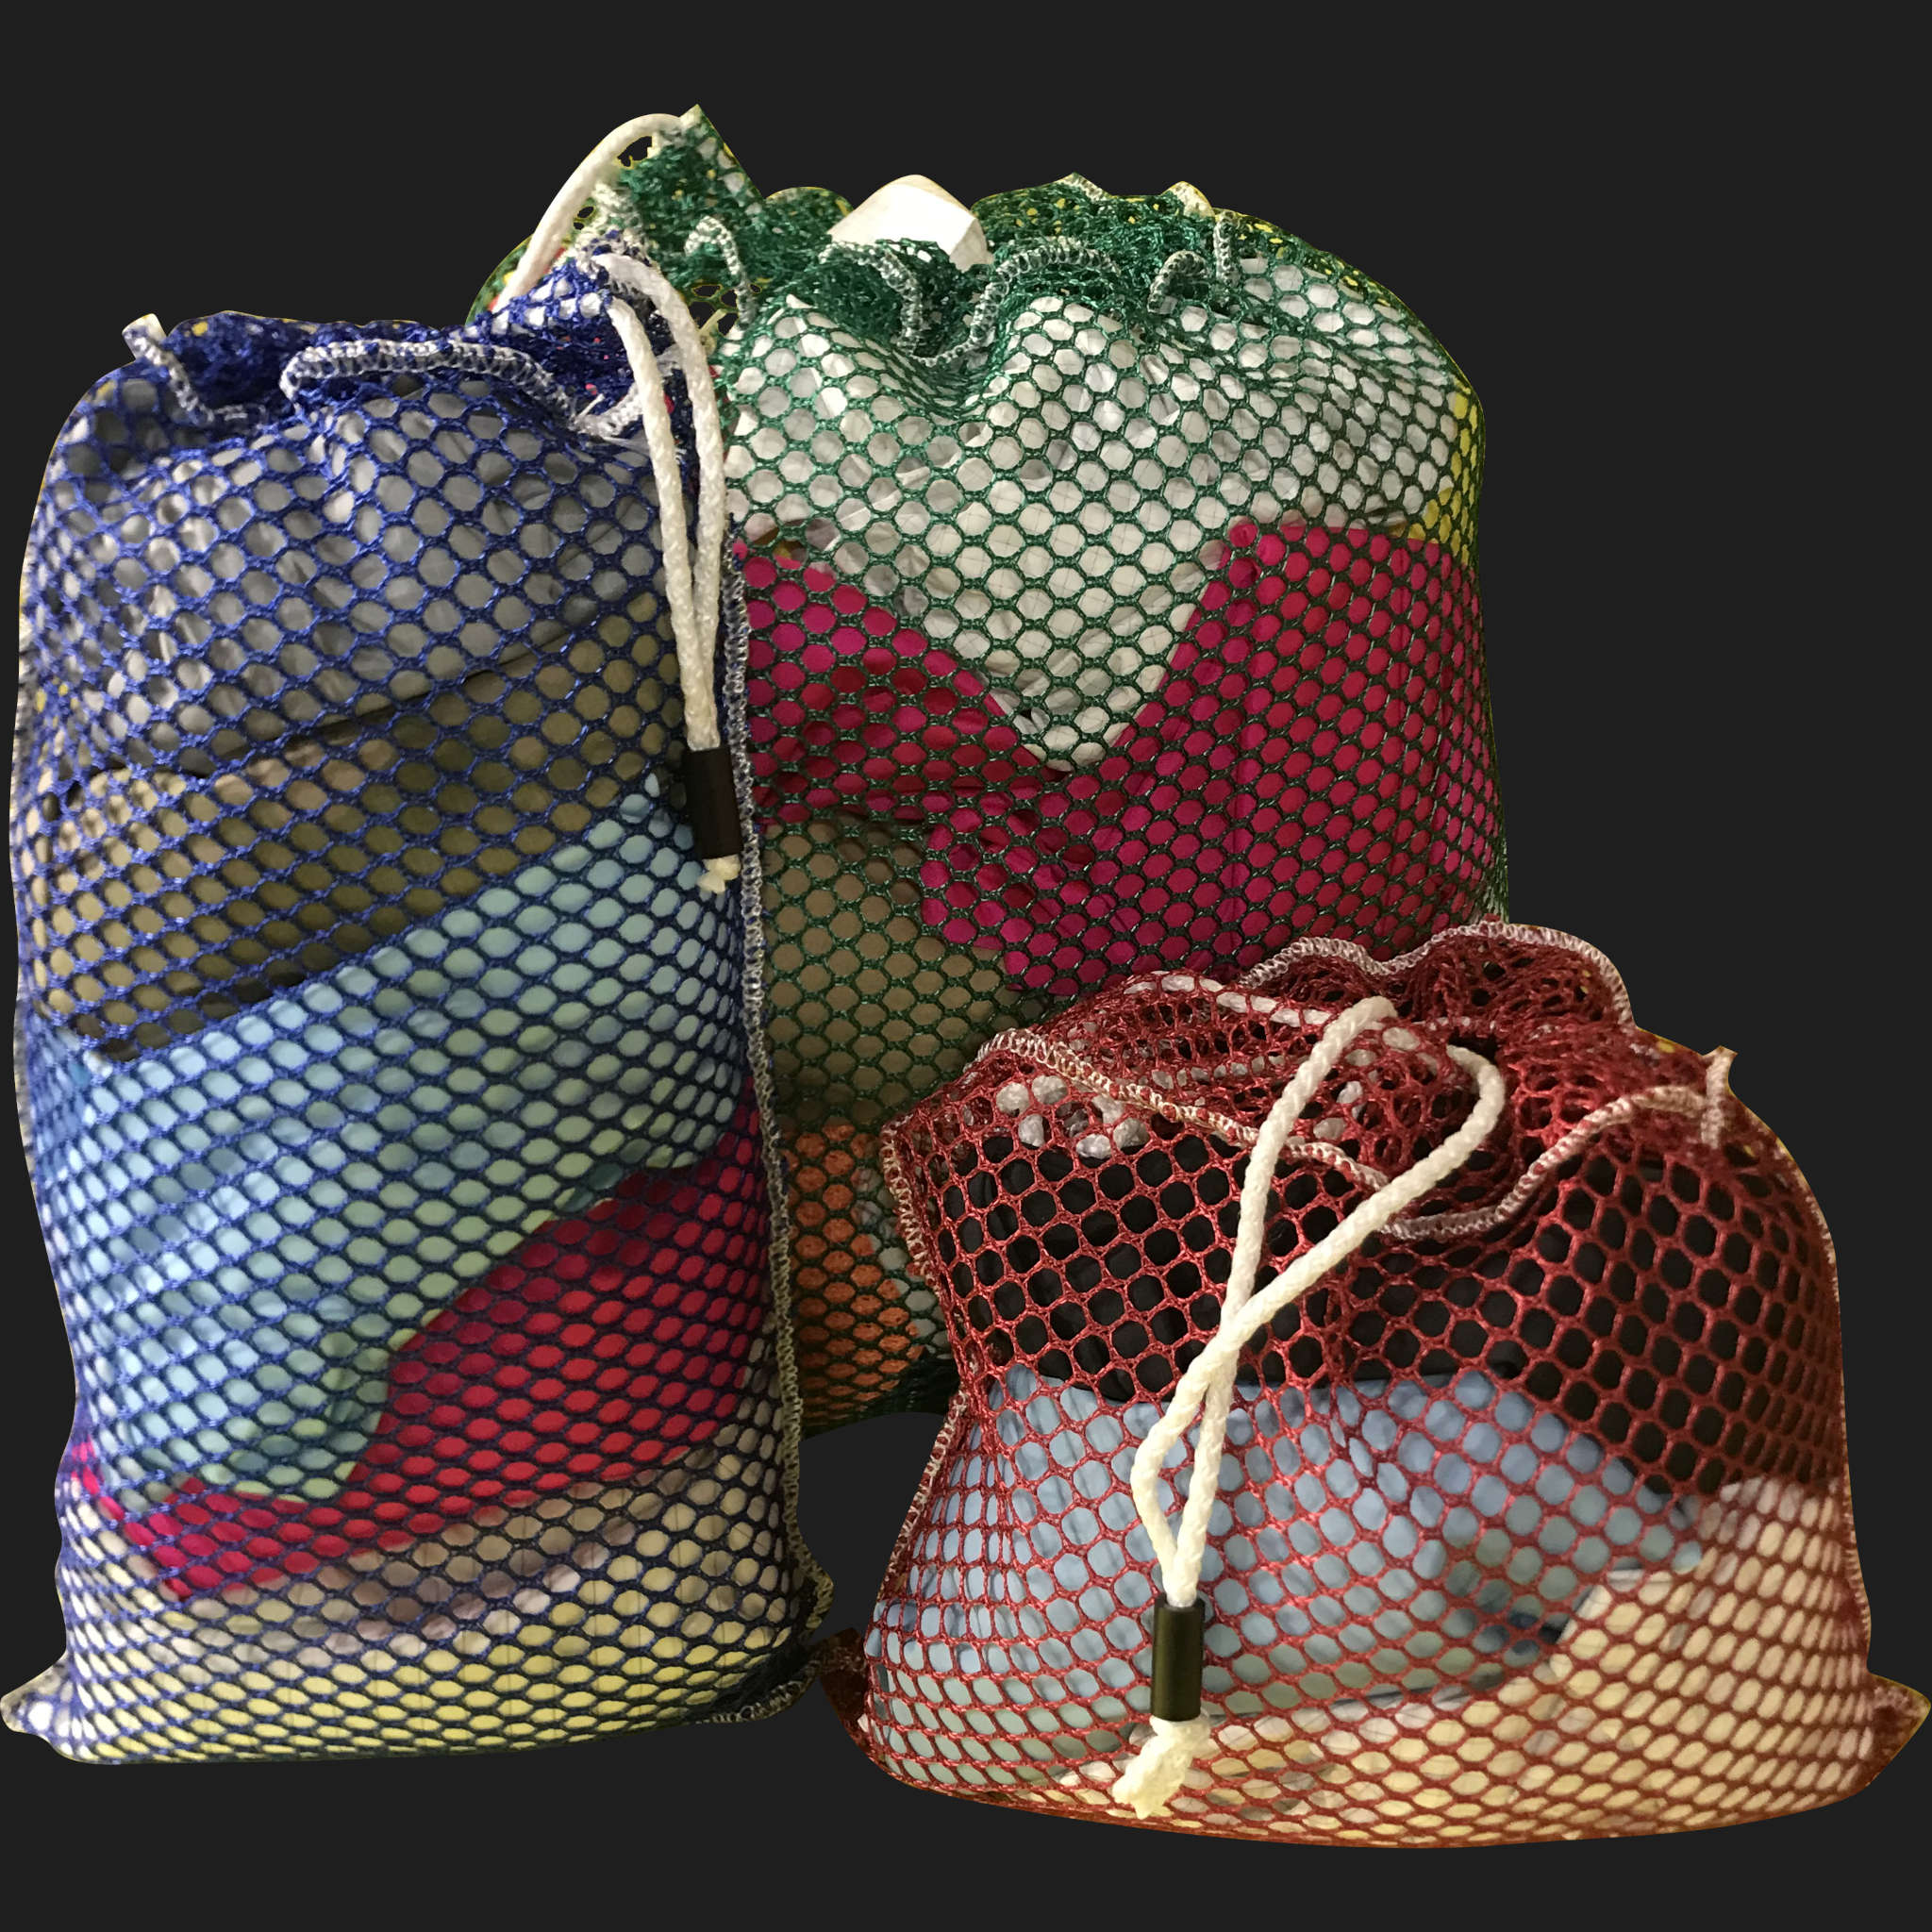 22" x 34" Customized Mesh-Net-Laundry Bags Heavy Duty with Cord and barrellock closure